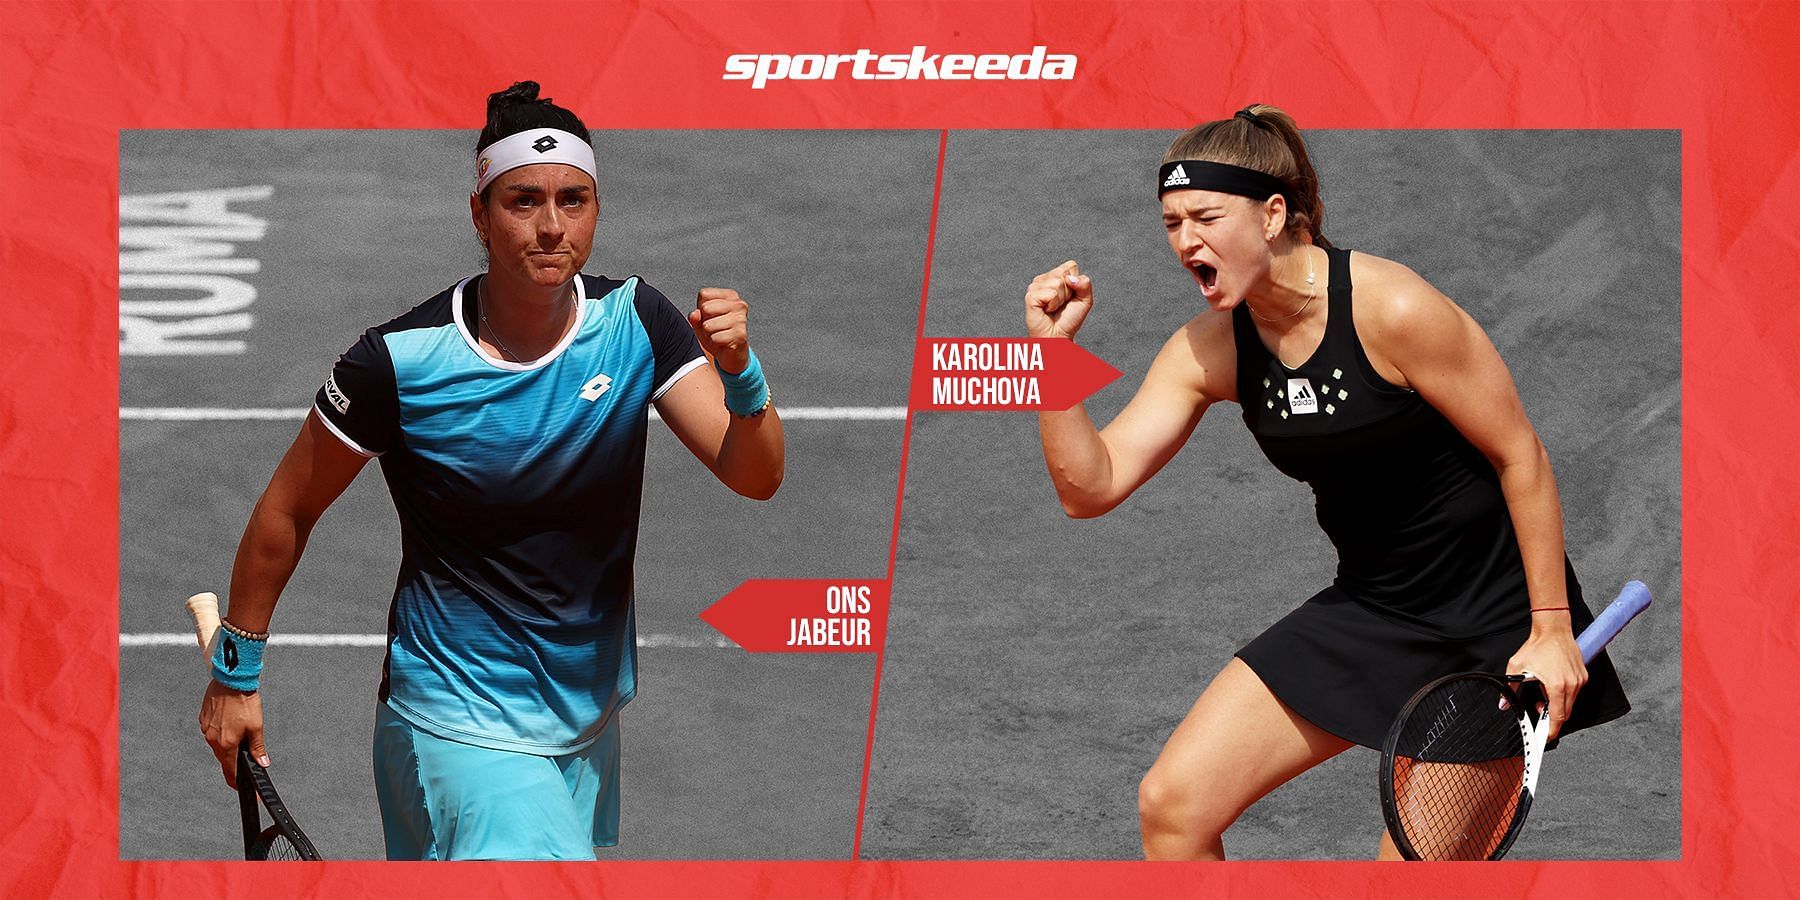 Ons Jabeur (L) will face off against Karolina Muchova in Berlin